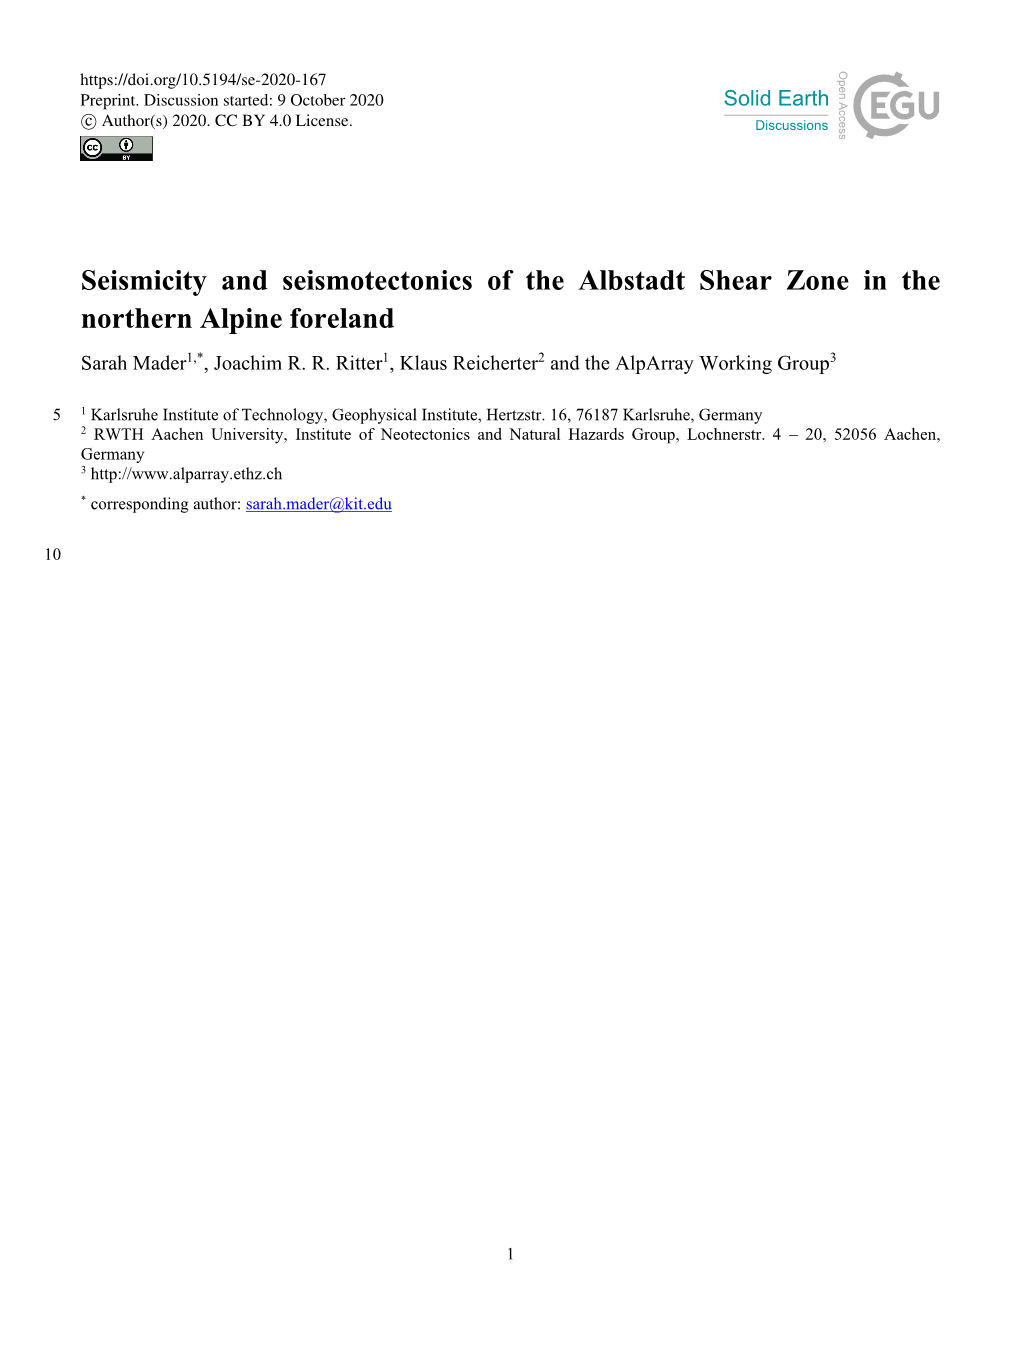 Seismicity and Seismotectonics of the Albstadt Shear Zone in the Northern Alpine Foreland Sarah Mader1,*, Joachim R